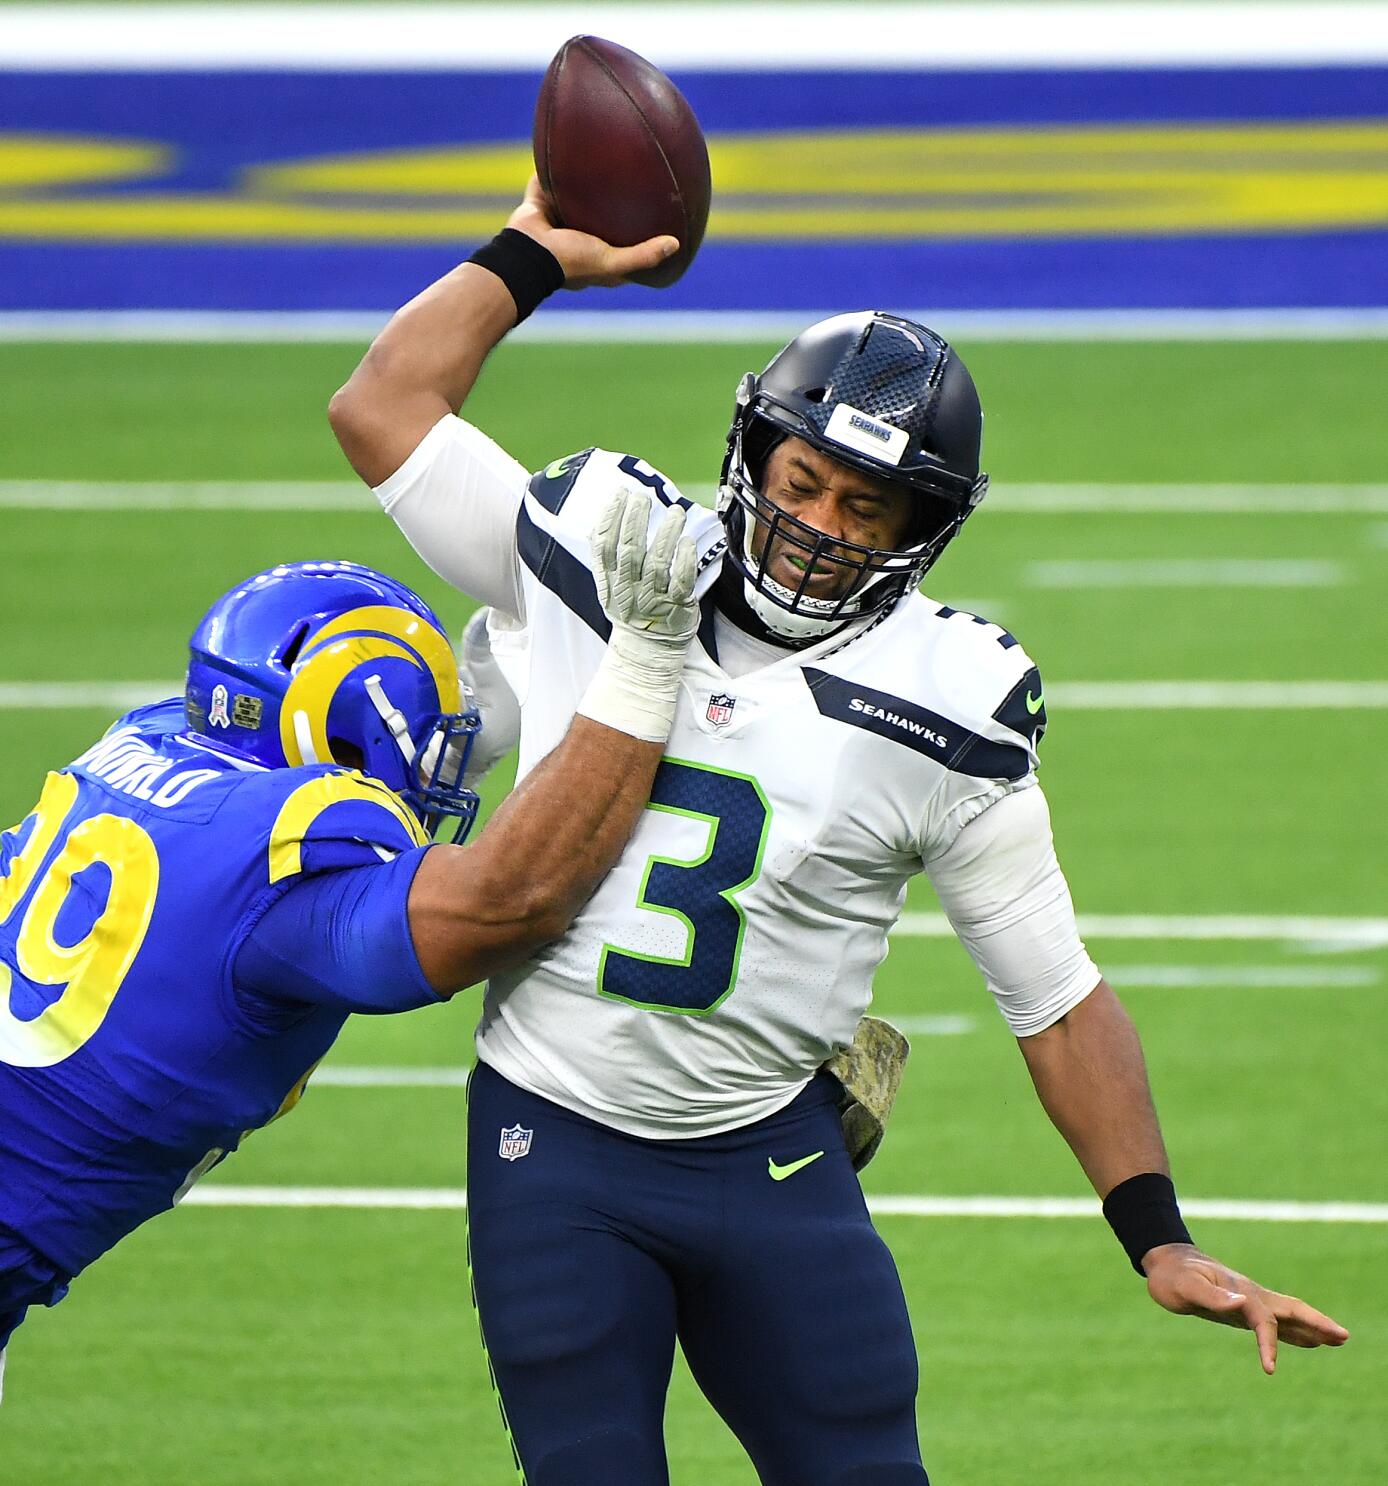 Cardinals-Seahawks game moved to Sunday Night Football on NBC/12